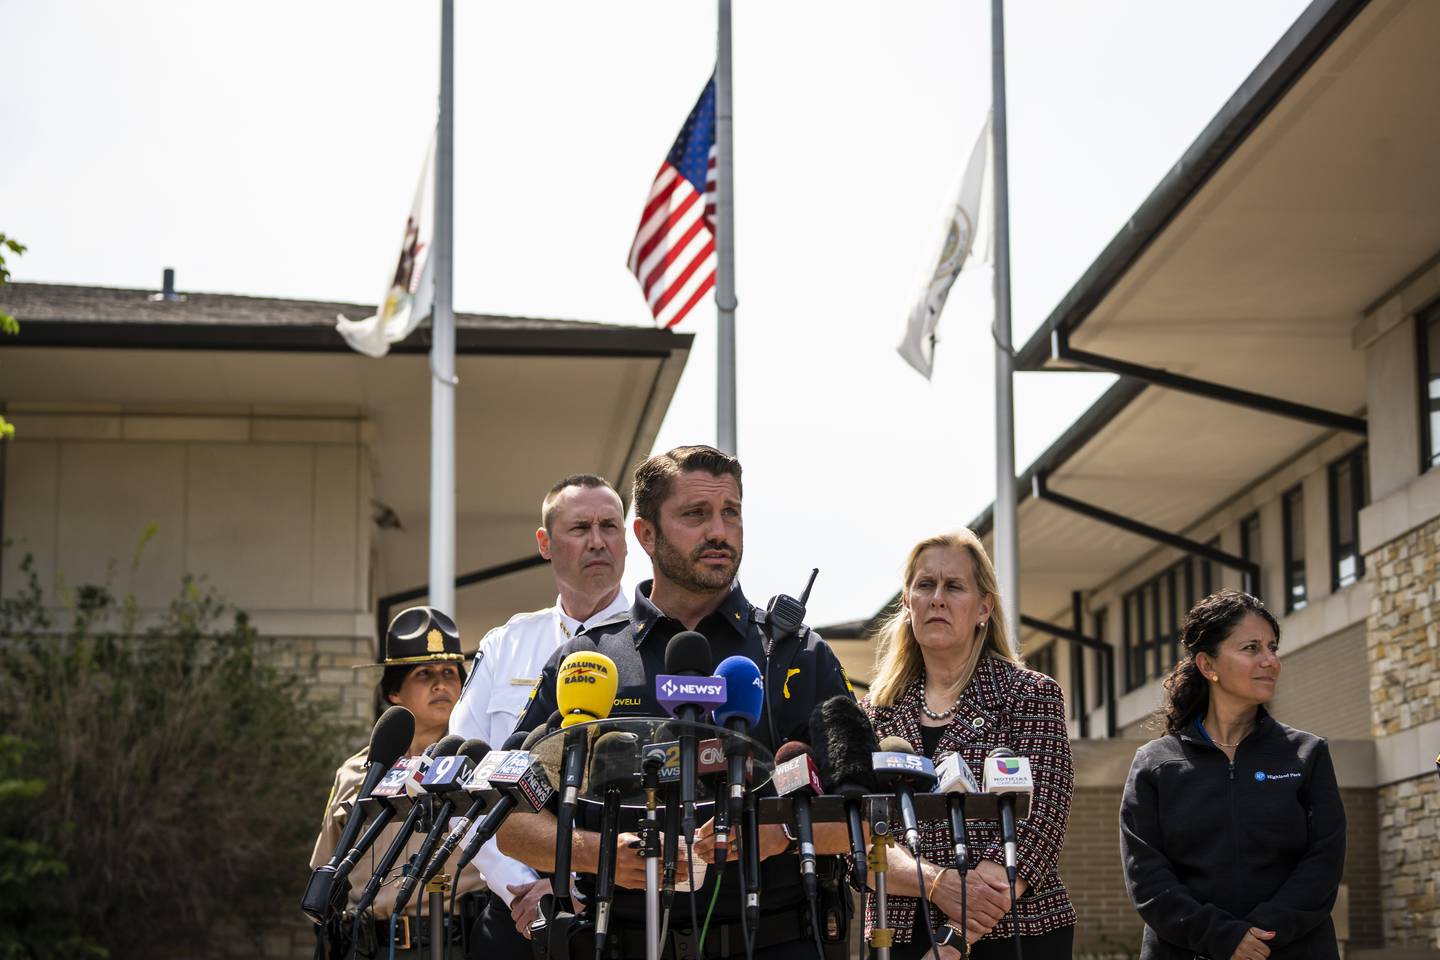 Flag hang at half staff as Highland Park Police Chief Louis Jogmen and Mayor Nancy Rotering look on while Deputy Chief Christopher Covelli, of the Lake County sheriff's office and the Lake County major crimes task force, speaks to the media during a news conference outside the Highland Park Police Department, Tuesday morning, July 5, 2022, in Highland Park, Ill., one day after a gunman killed several people and wounded dozens more by firing a high-powered rifle from a rooftop onto a crowd attending a Fourth of July parade, (Ashlee Rezin/Chicago Sun-Times via AP)